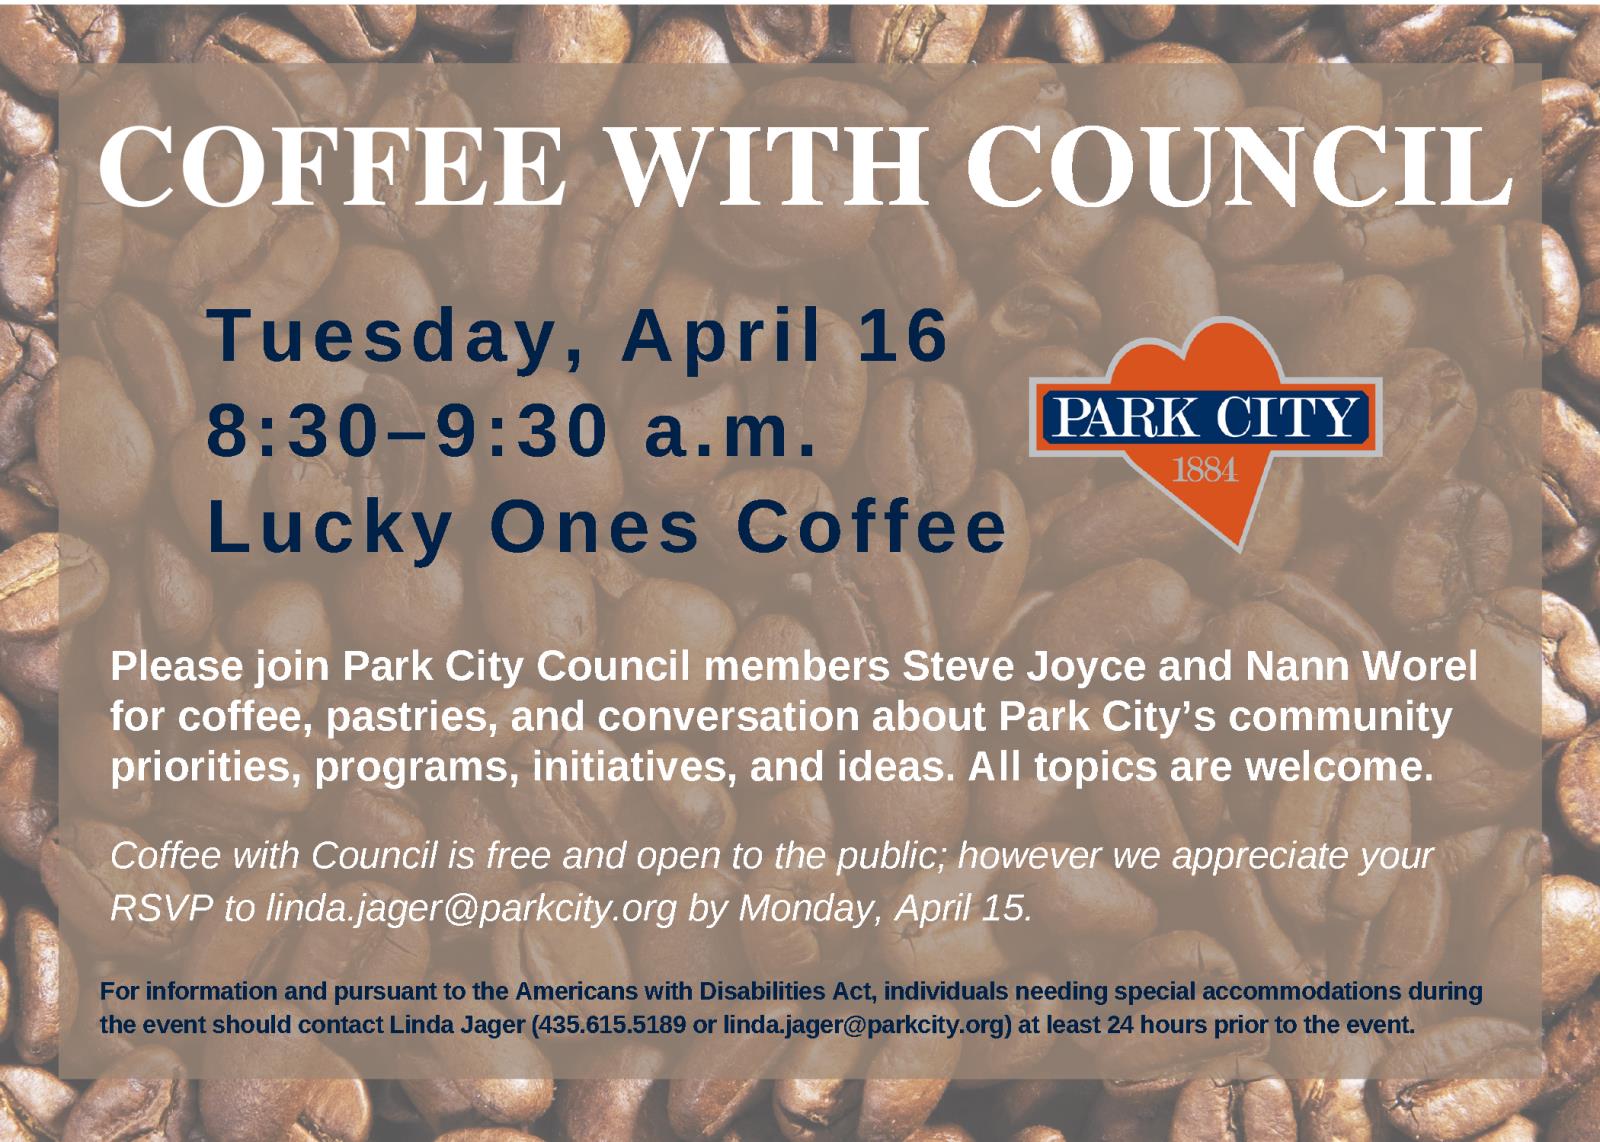 COFFEE WITH COUNCIL_4.16.19